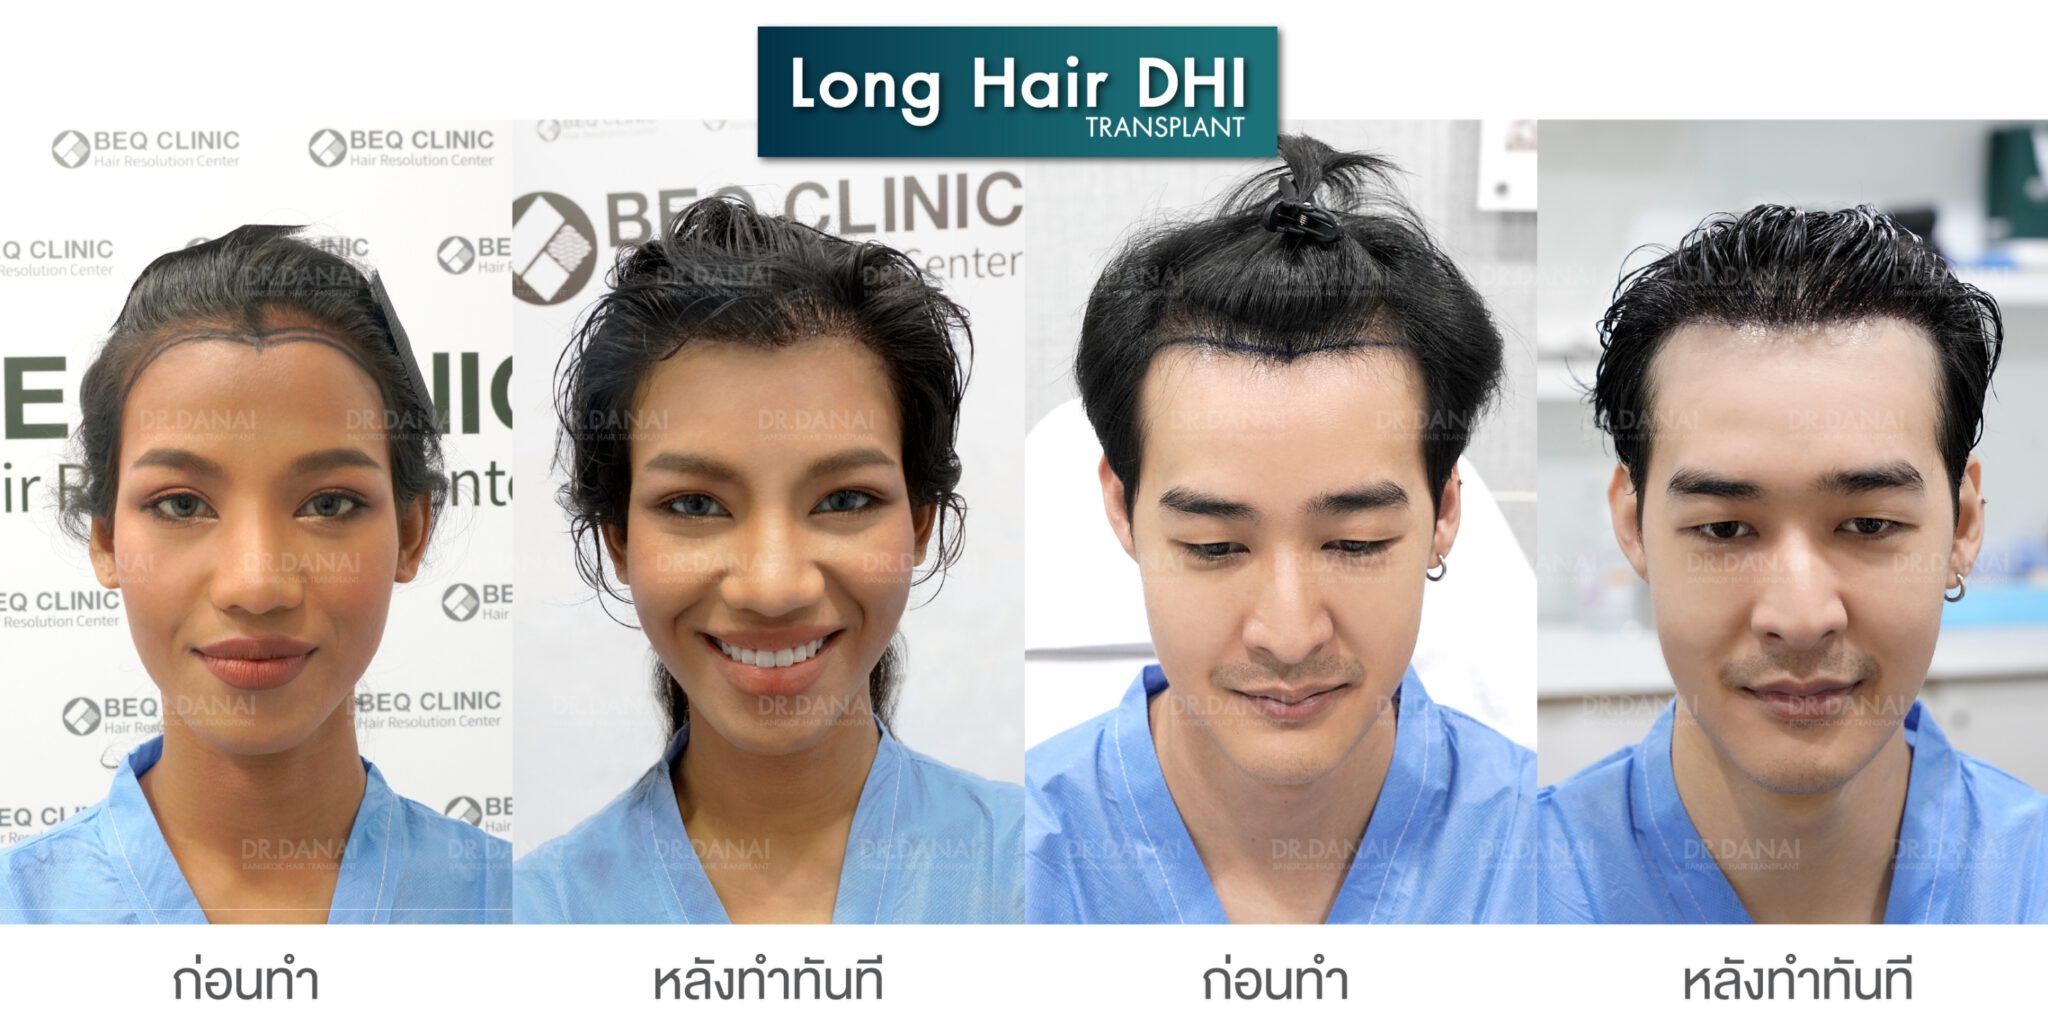 before and after Long Hair DHI